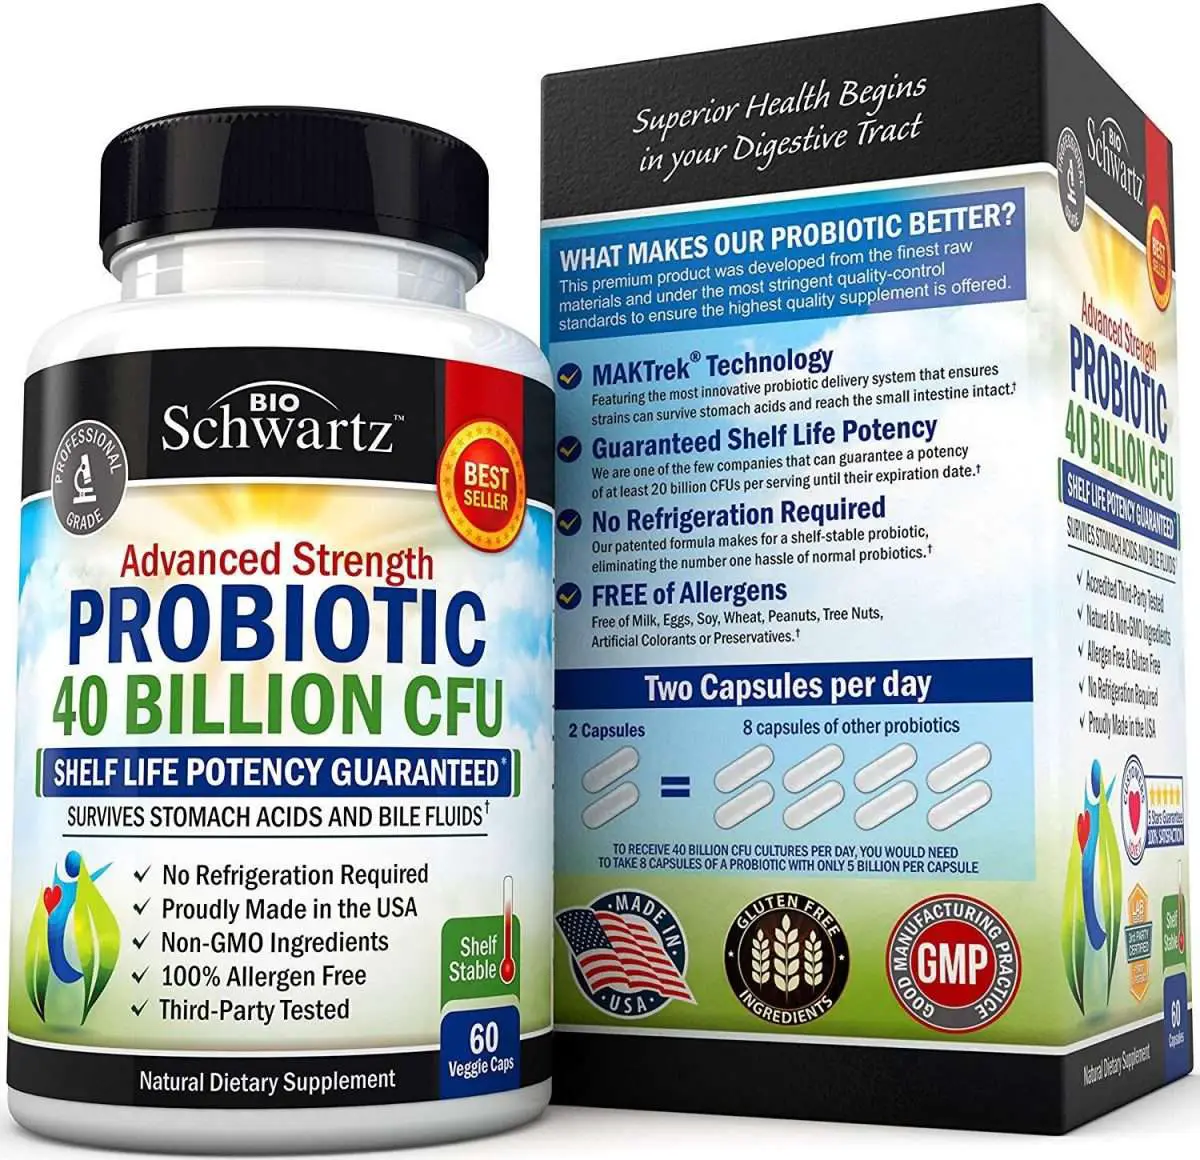 The goal of Probiotics is to balance the " Good"  back into your system ...